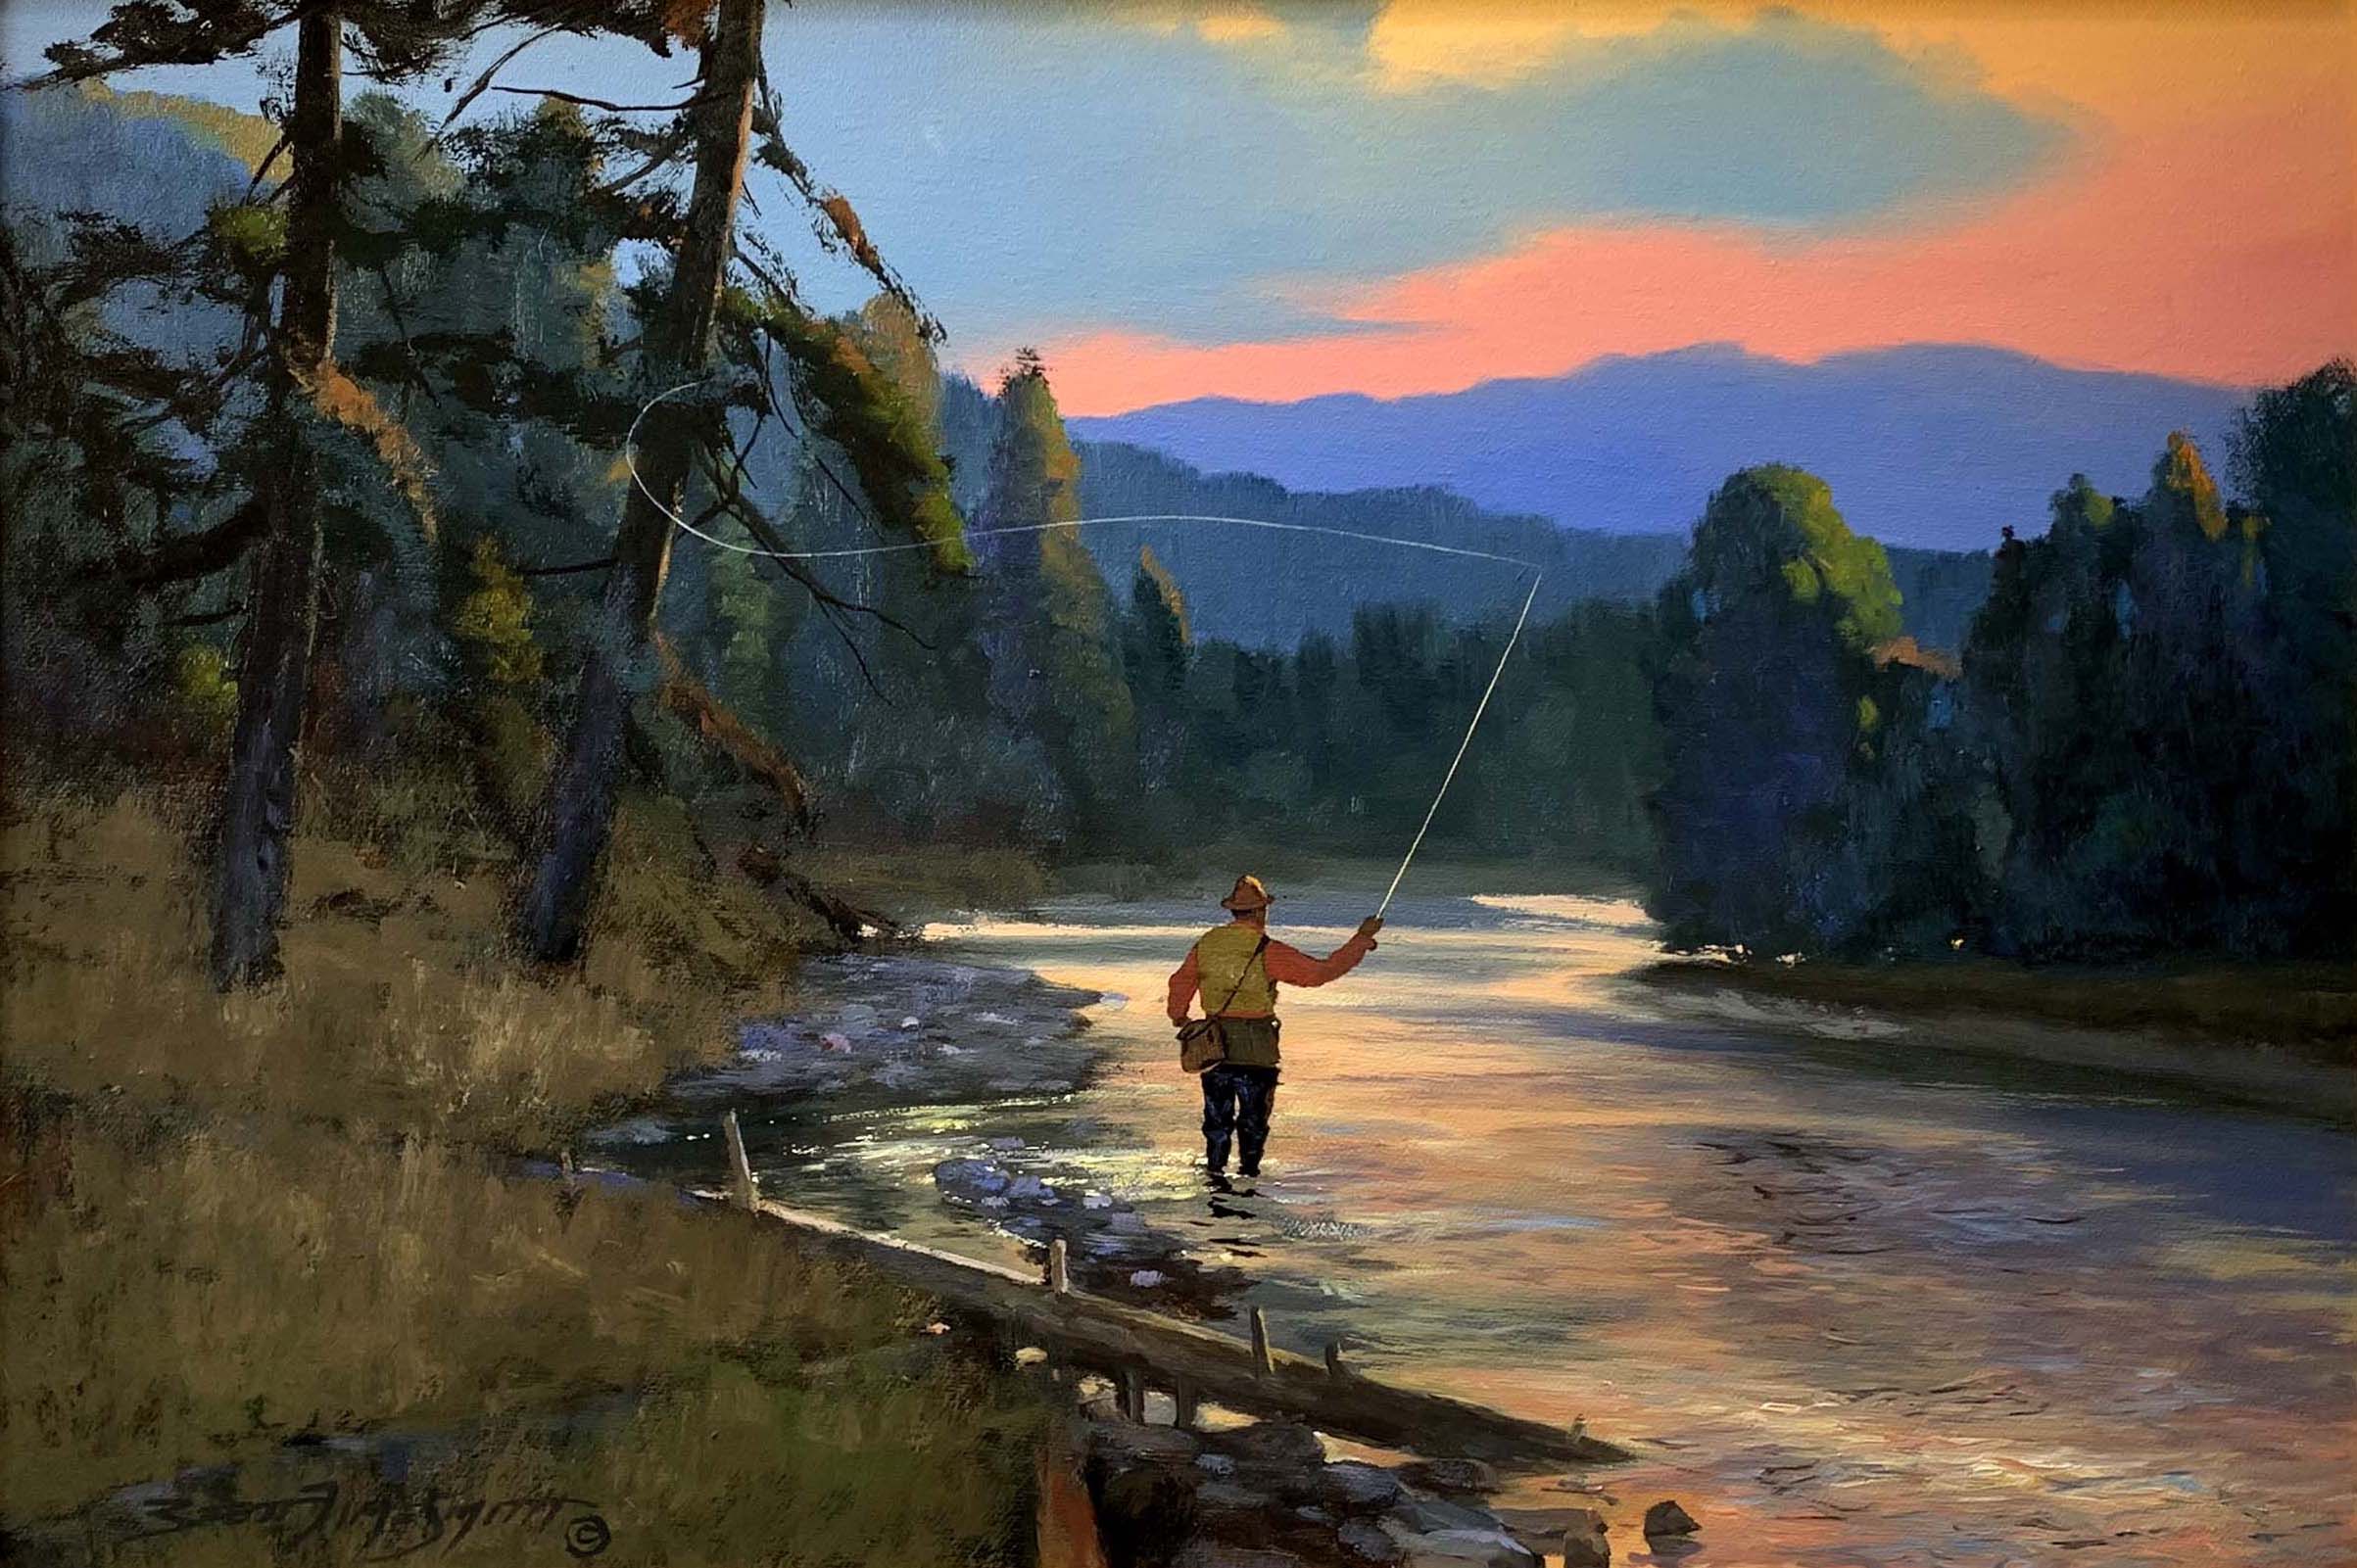 Brett Smith - On The River At Dusk, Oil on Canvas, 14 x 20 inches